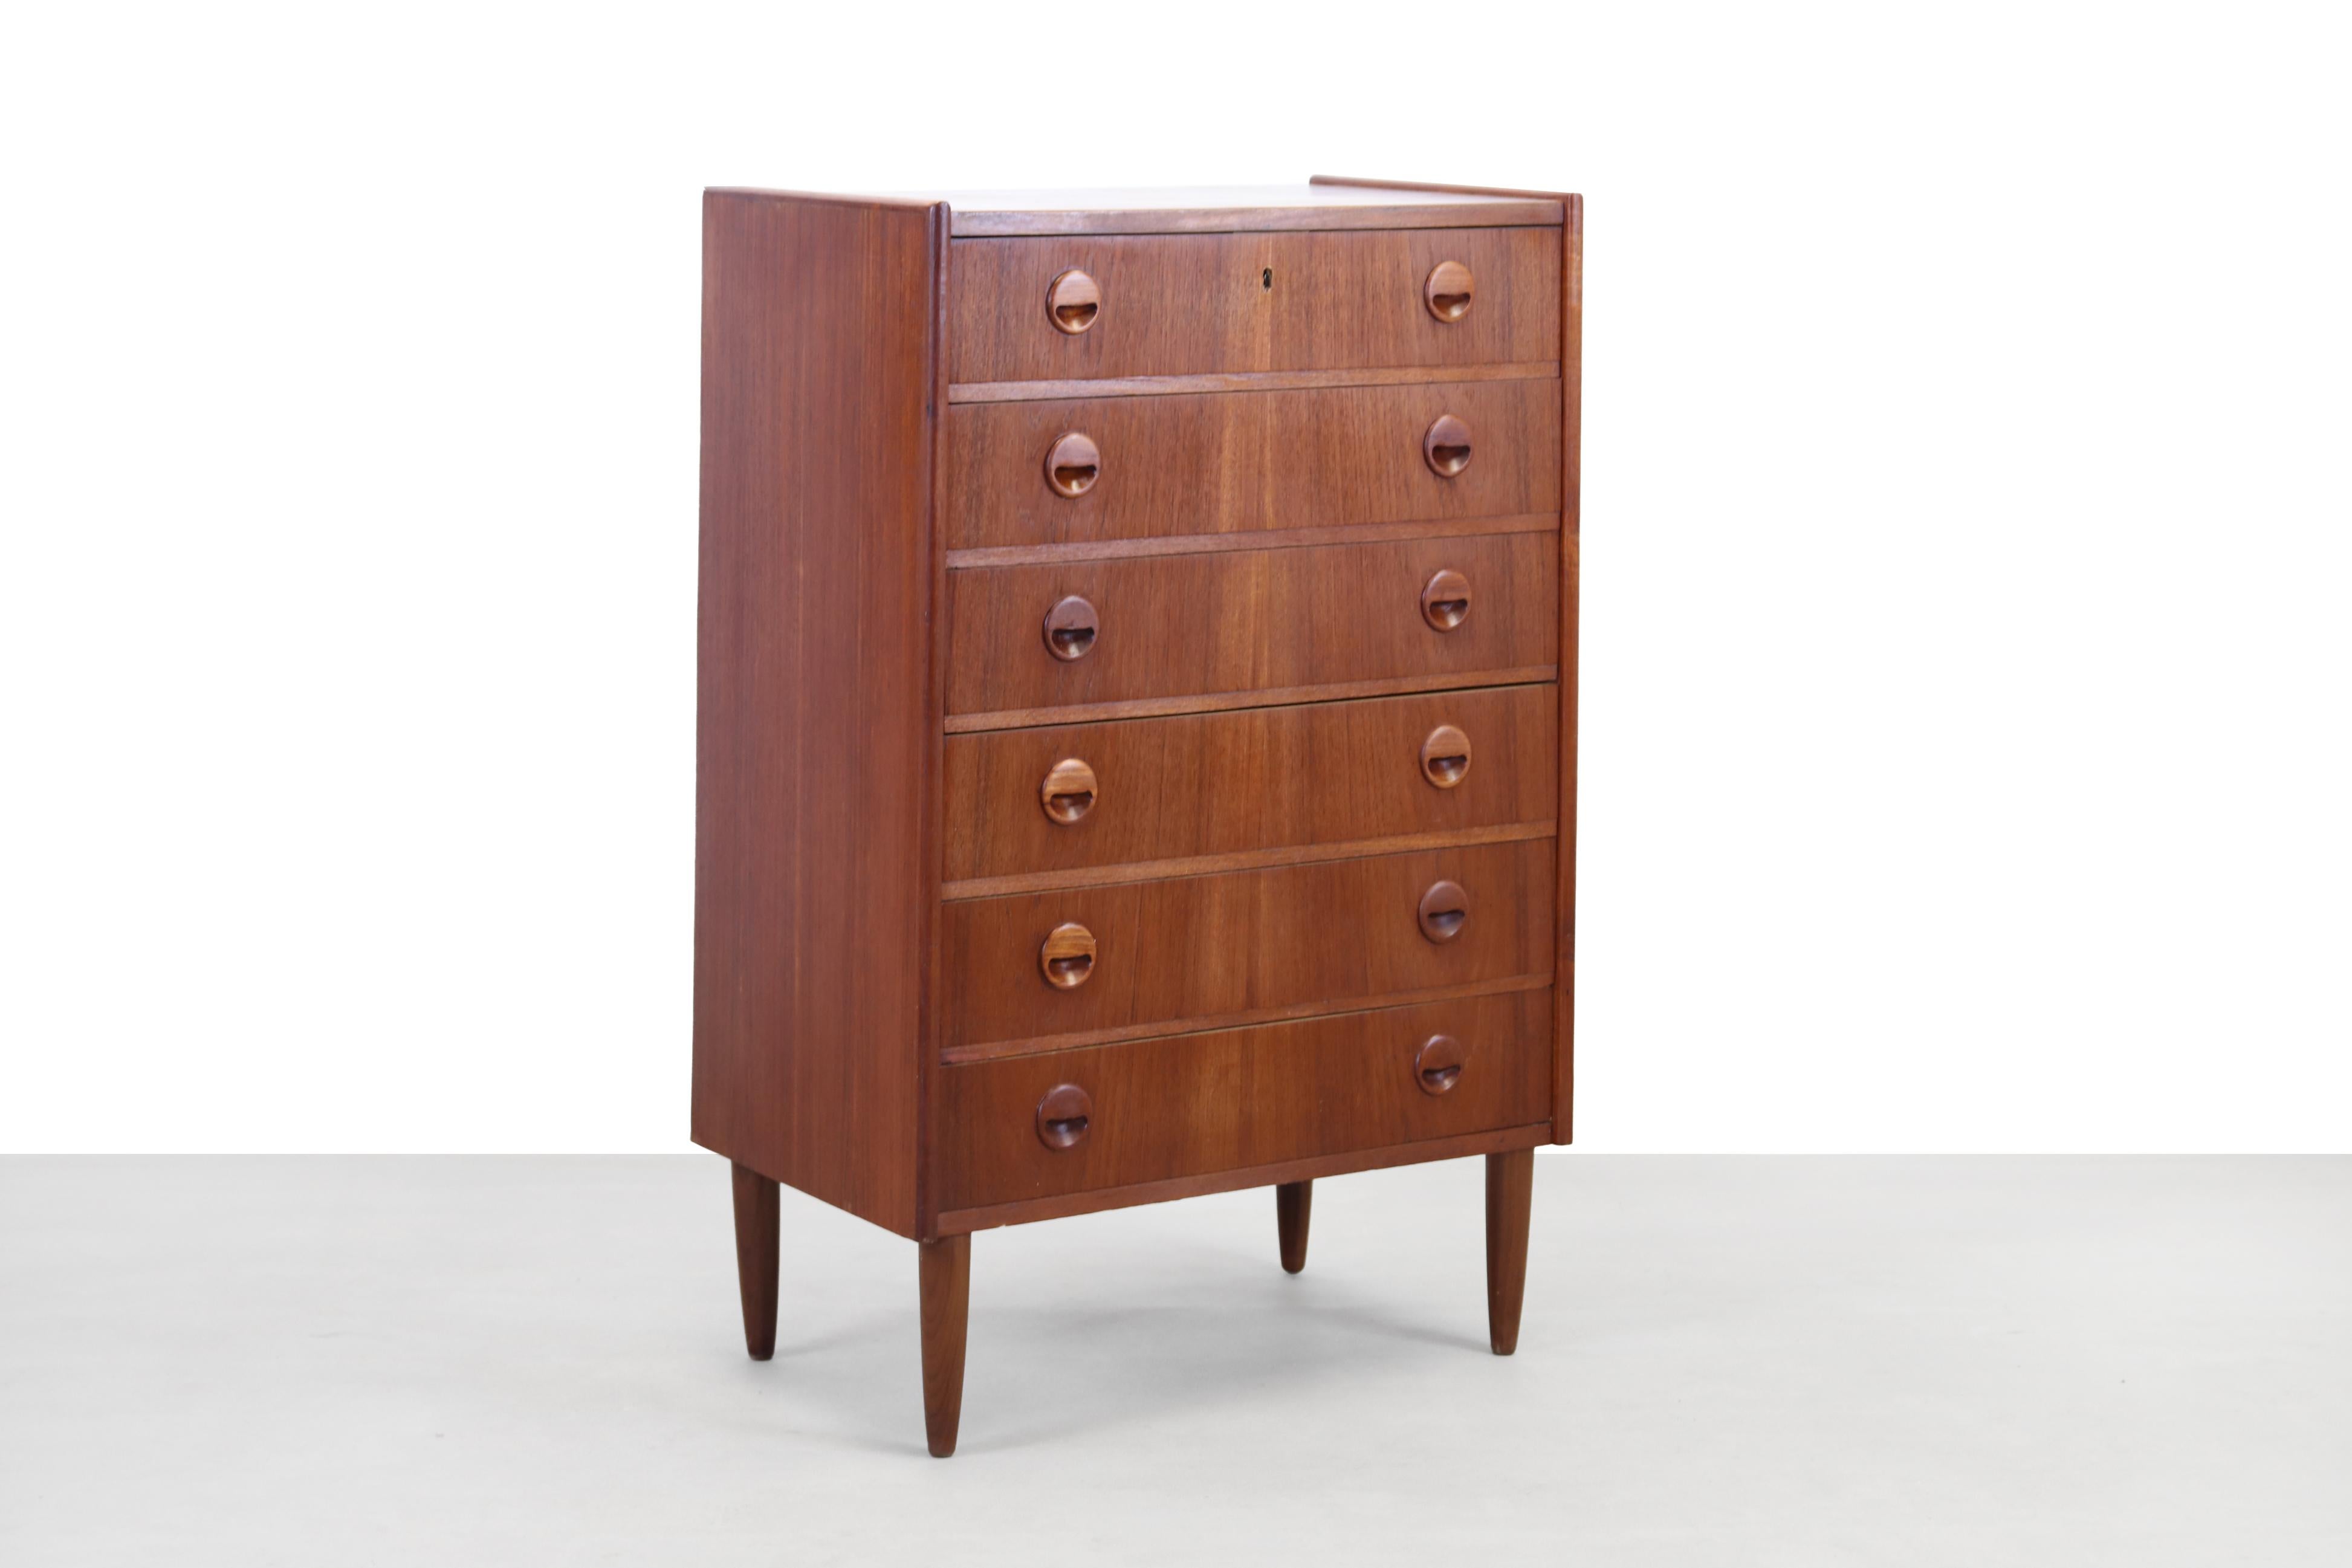 Danish design teak chest of drawers with 6 drawers. Made of teak wood with beautiful round handles. This chest of drawers comes from the 1960's from Denmark. Use this cabinet in the hallway, in the bedroom for your socks and underwear, or even